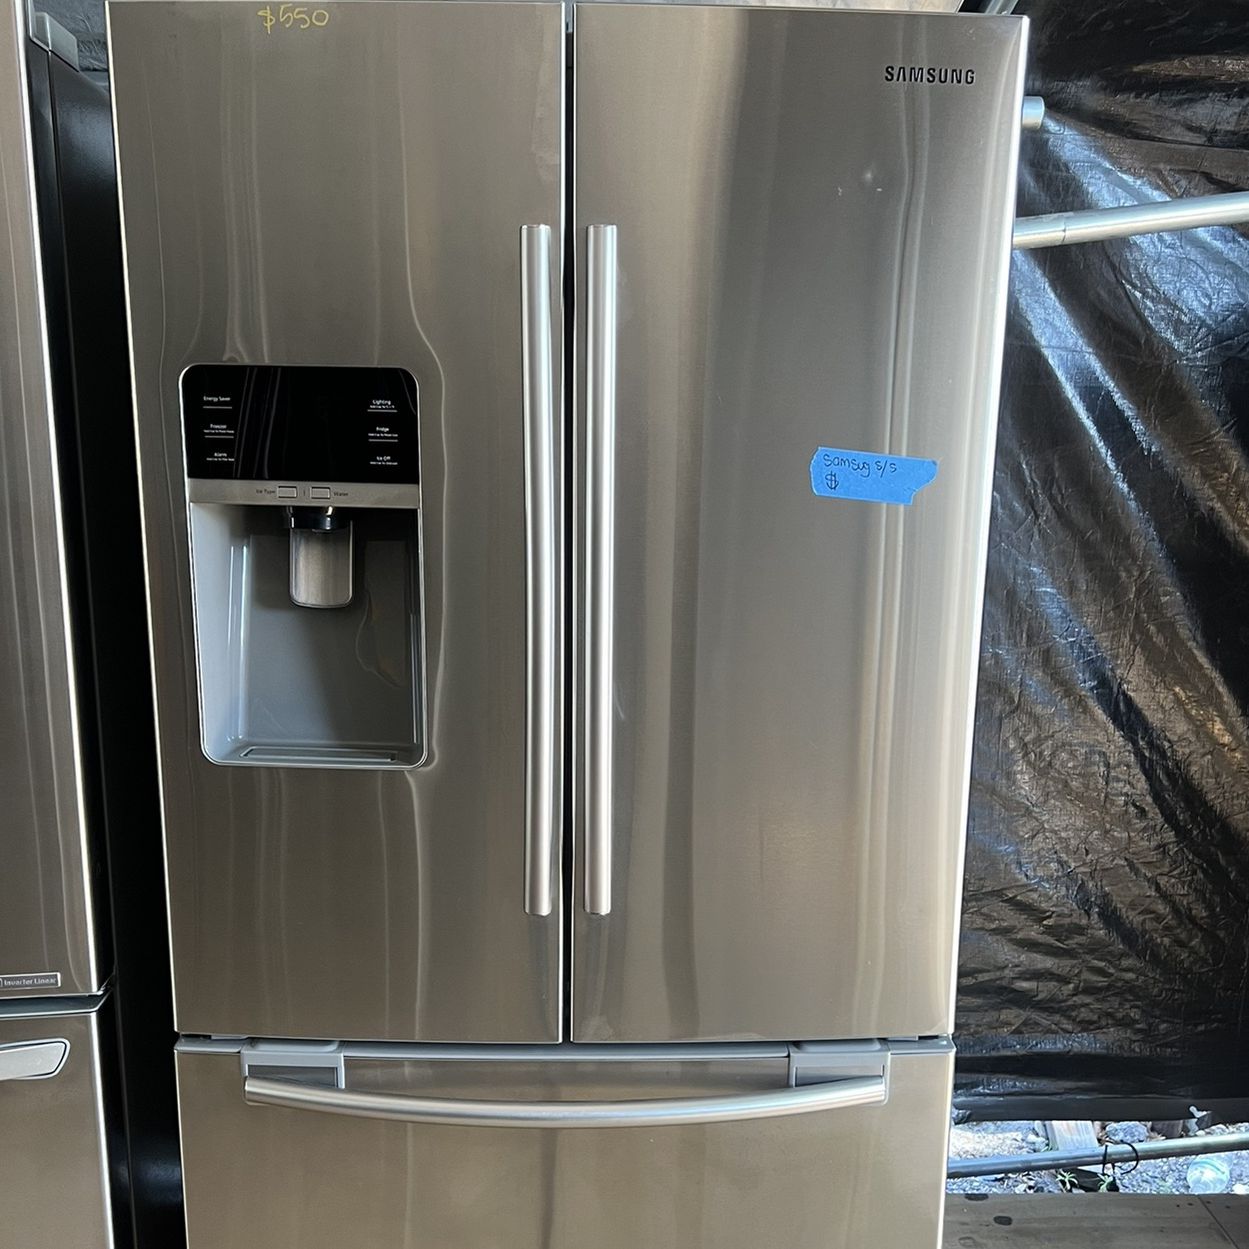 Samsung French Door Refrigerator   60 day warranty/ Located at:📍5415 Carmack Rd Tampa Fl 33610📍 